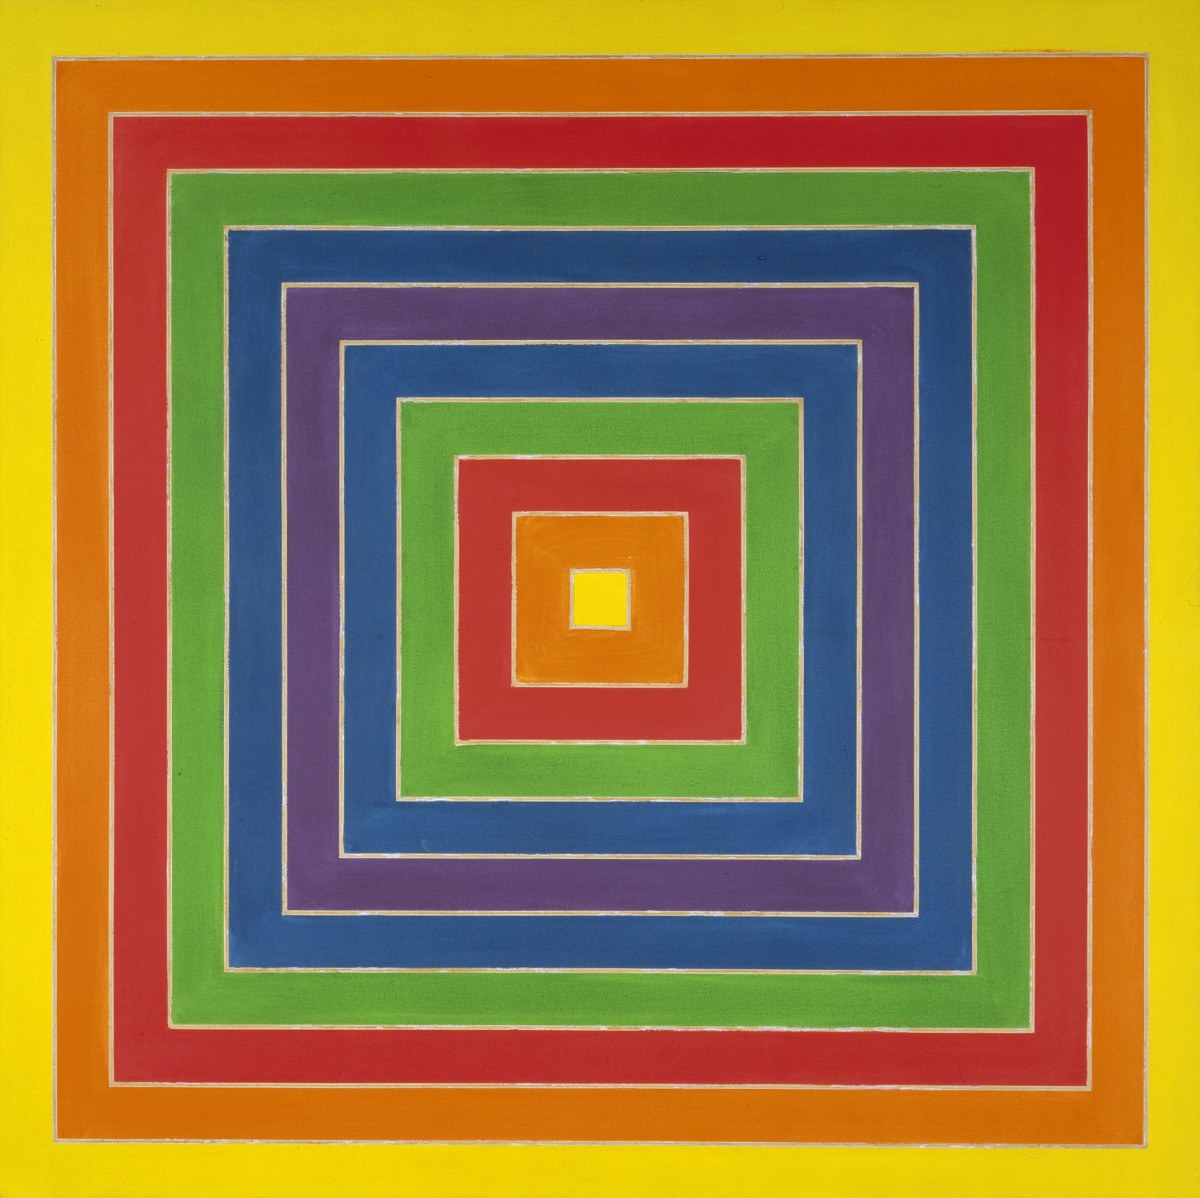 Frank Stella Selections From The Permanent Collection Lacma